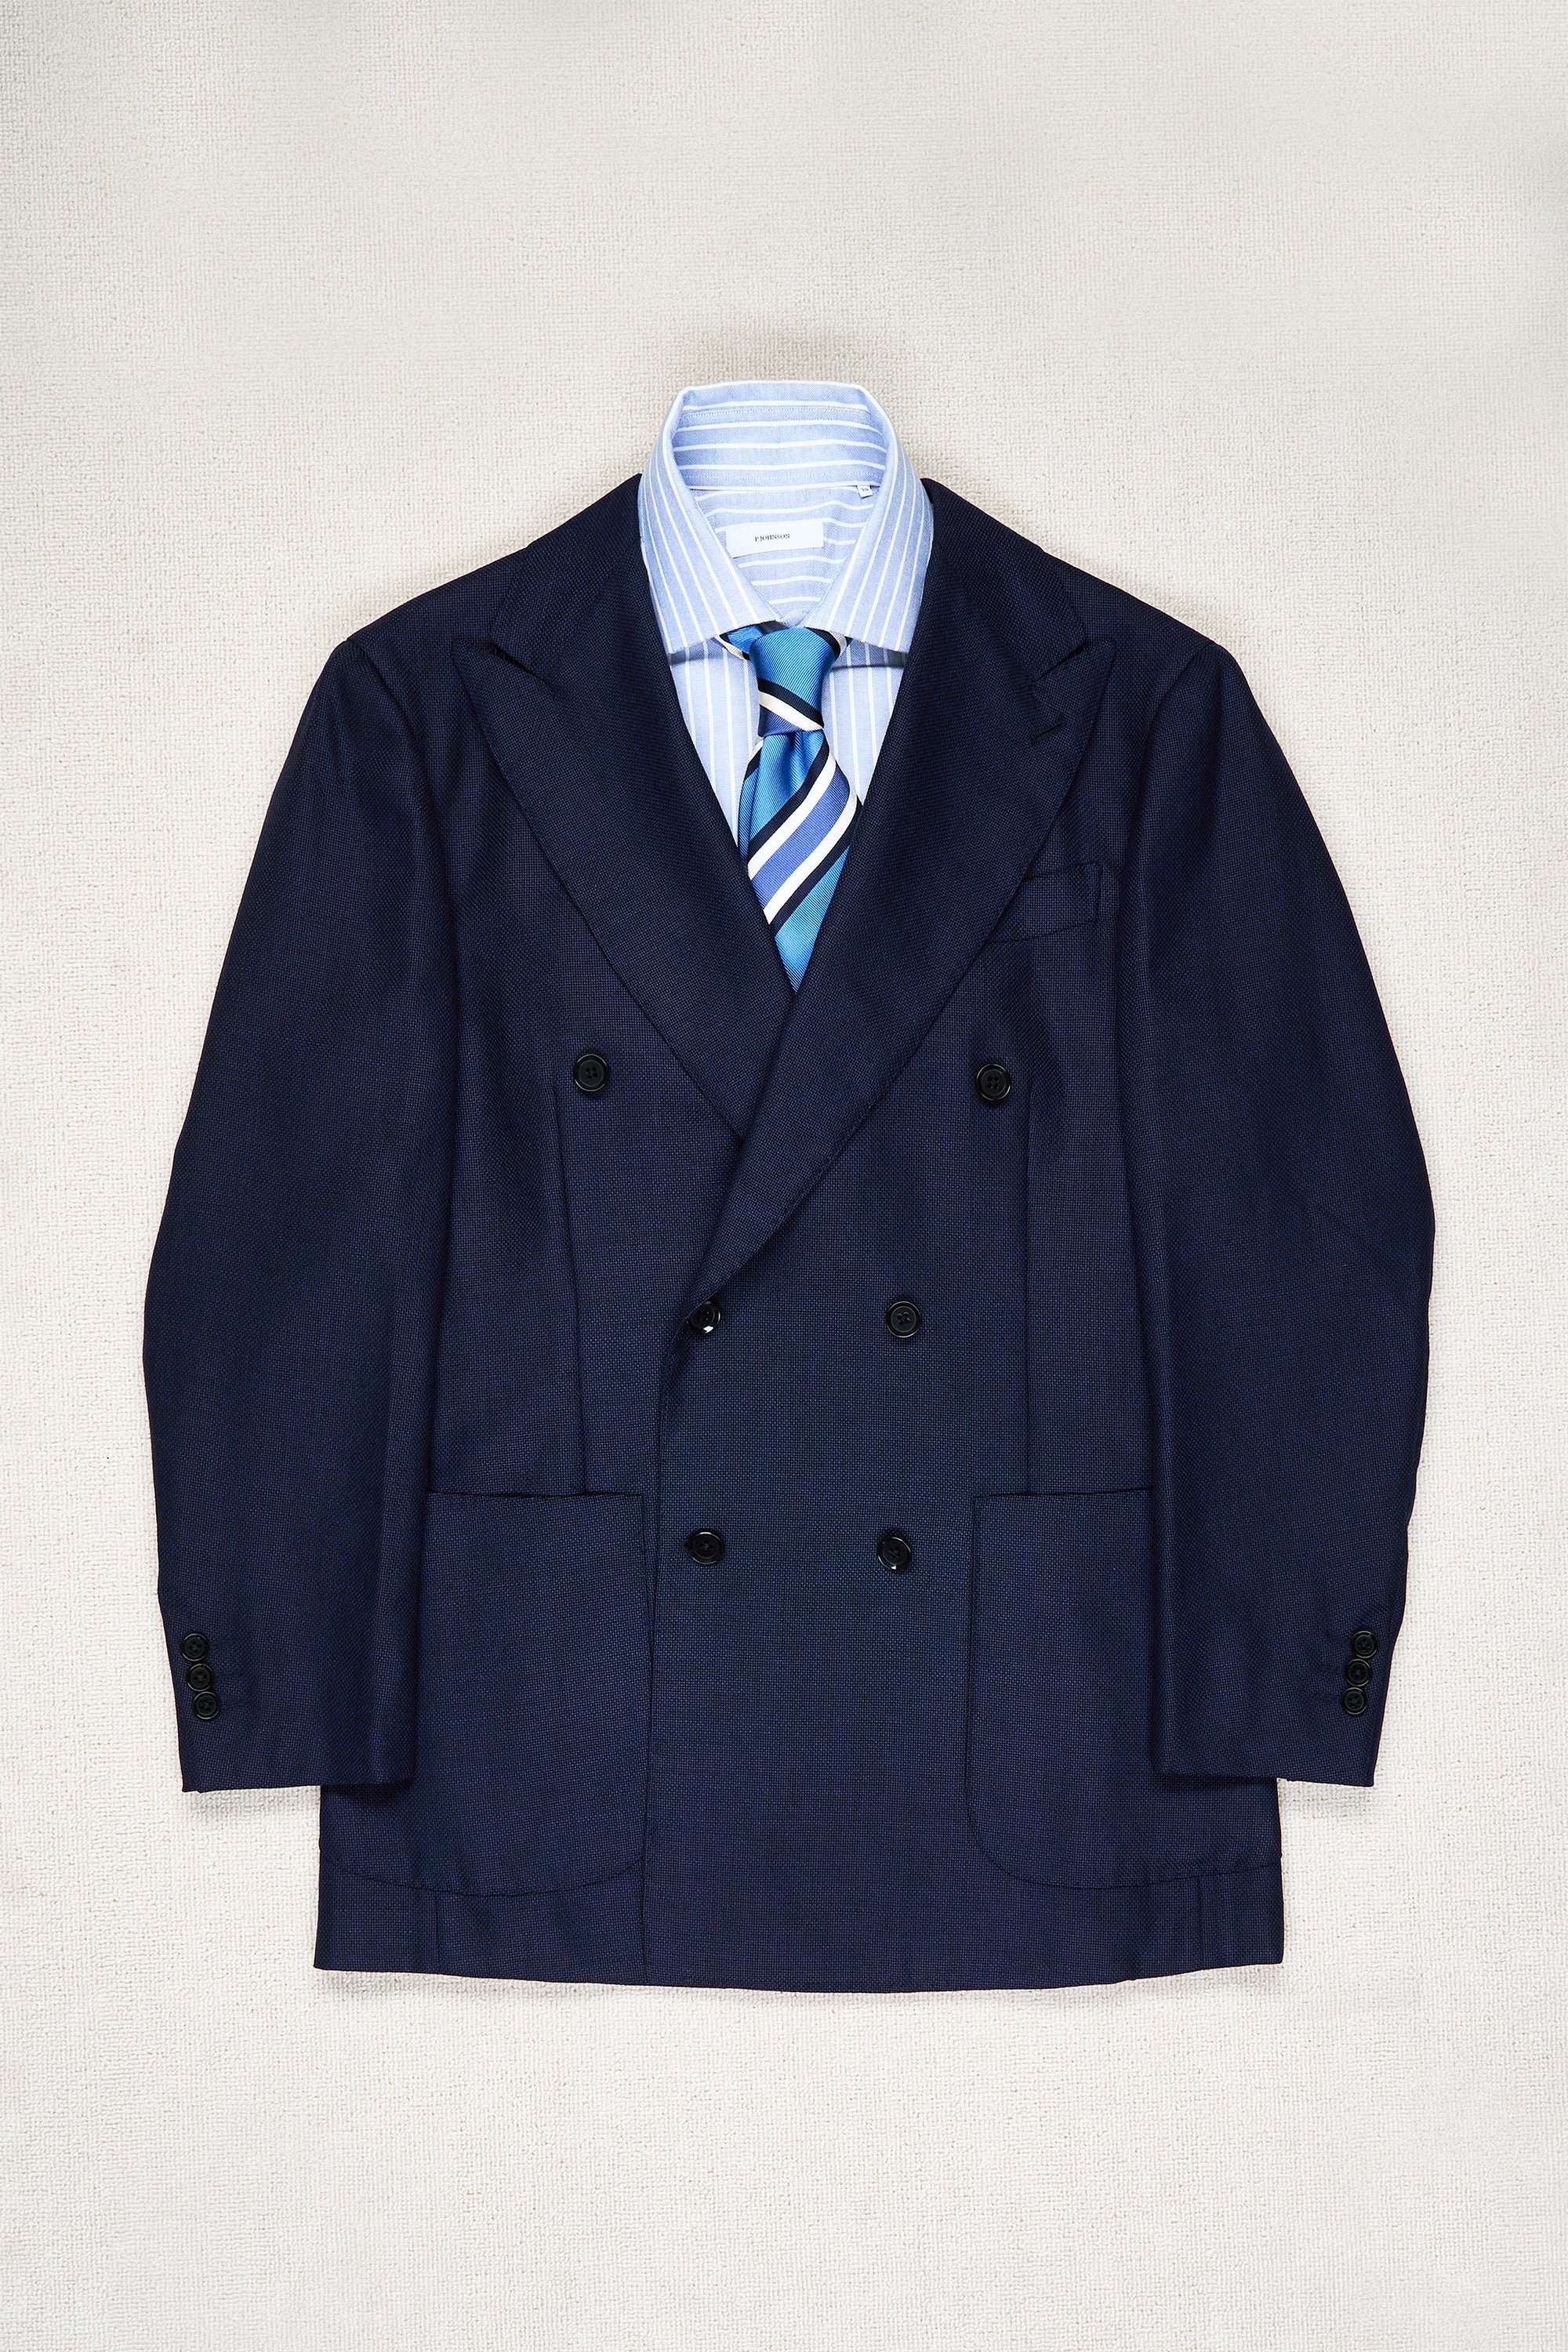 Ring Jacket 268F Navy Double Breasted Wool Sport Coat